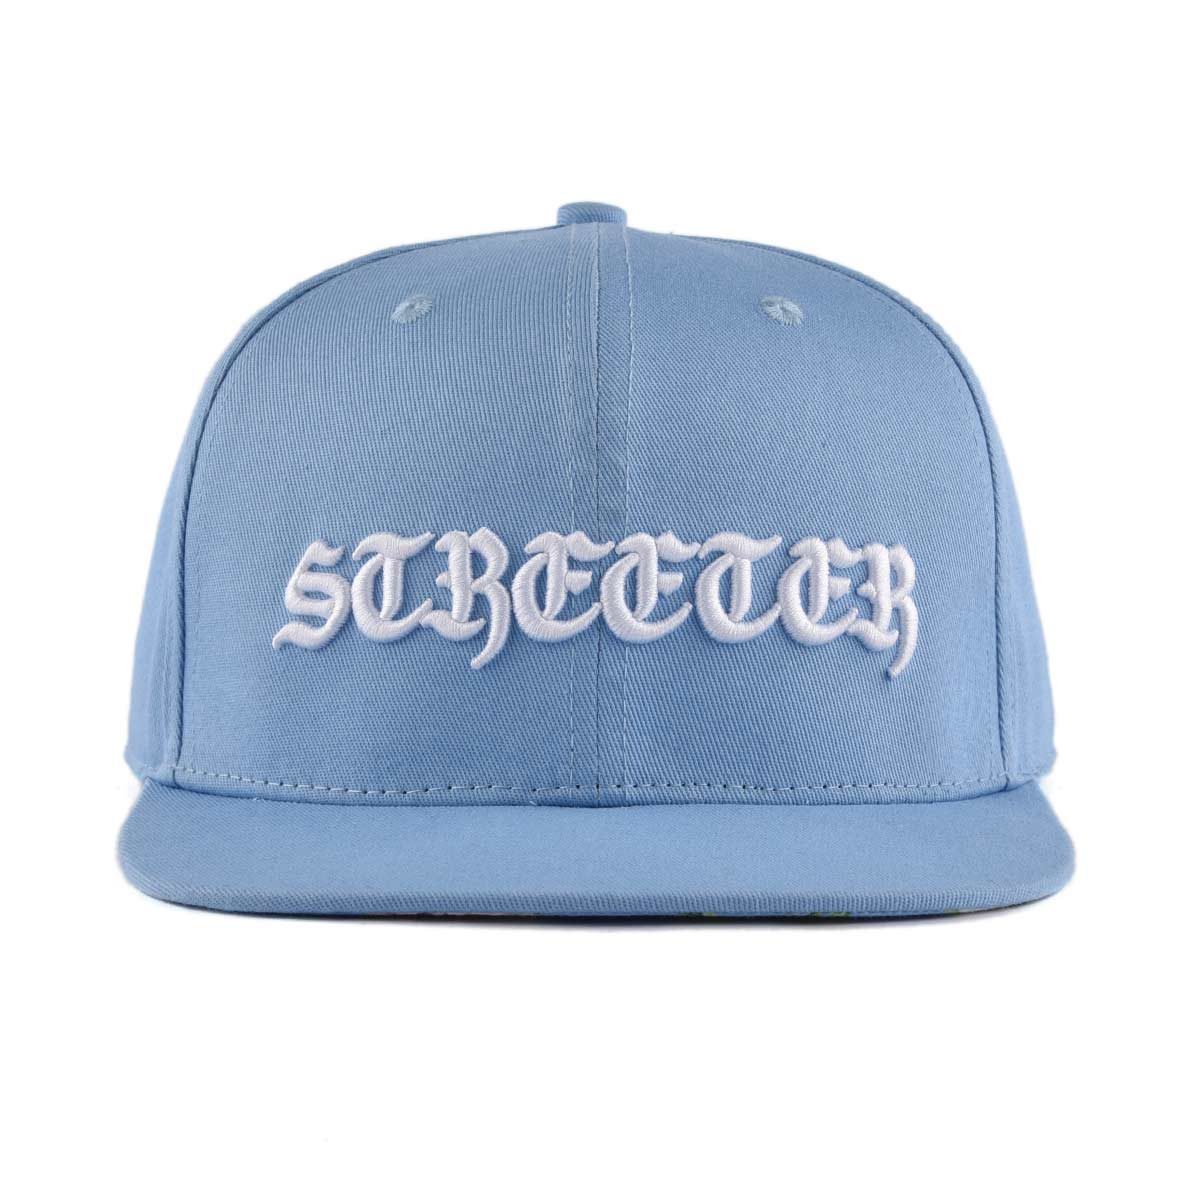 Streeter-casual-light-blue-snapback-hat-for-women-and-men-KN2012252